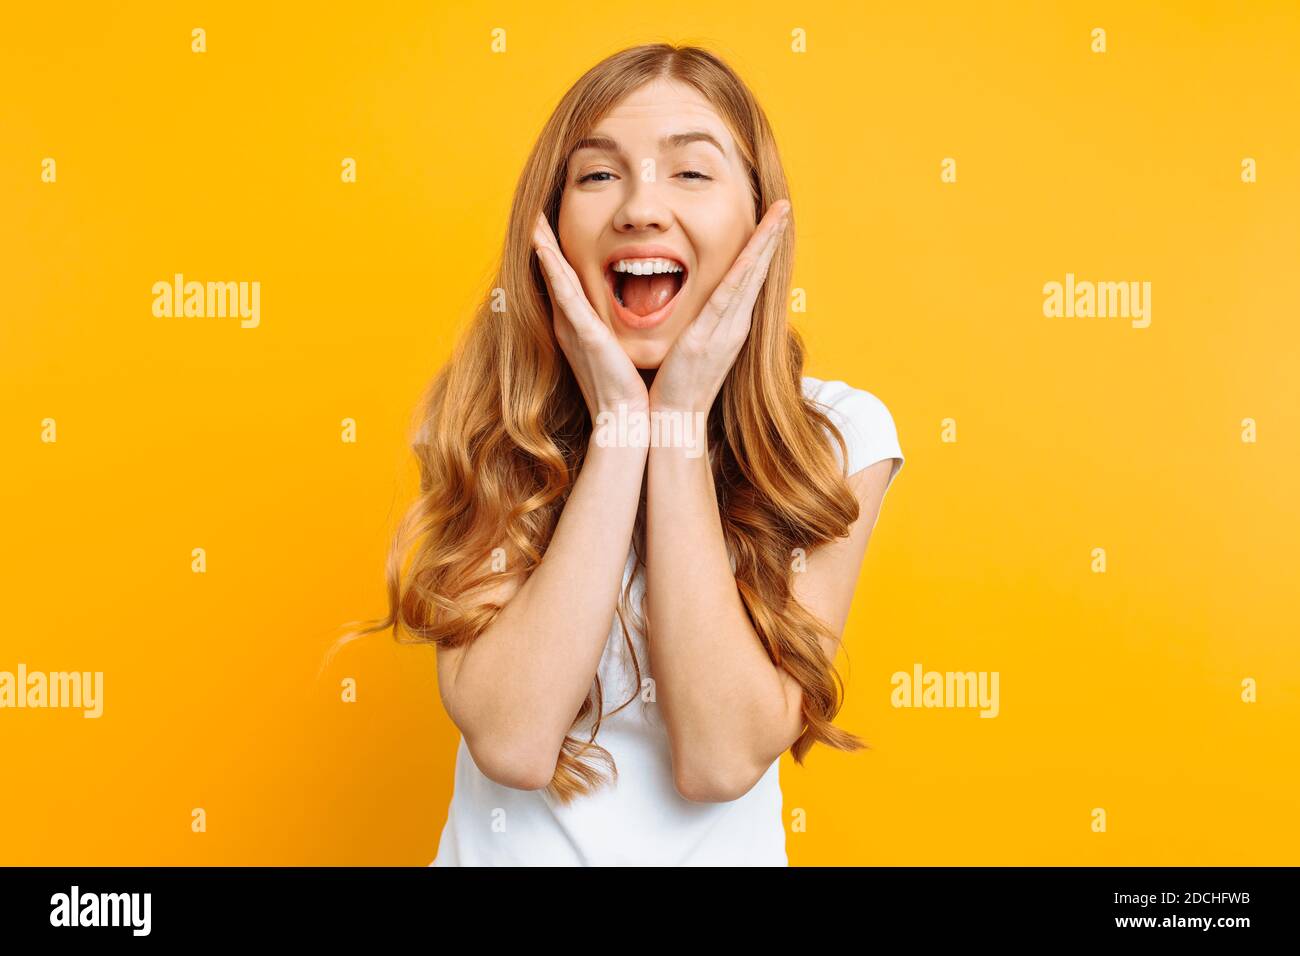 Portrait of an enthusiastic young girl screaming with joy over yellow background Stock Photo